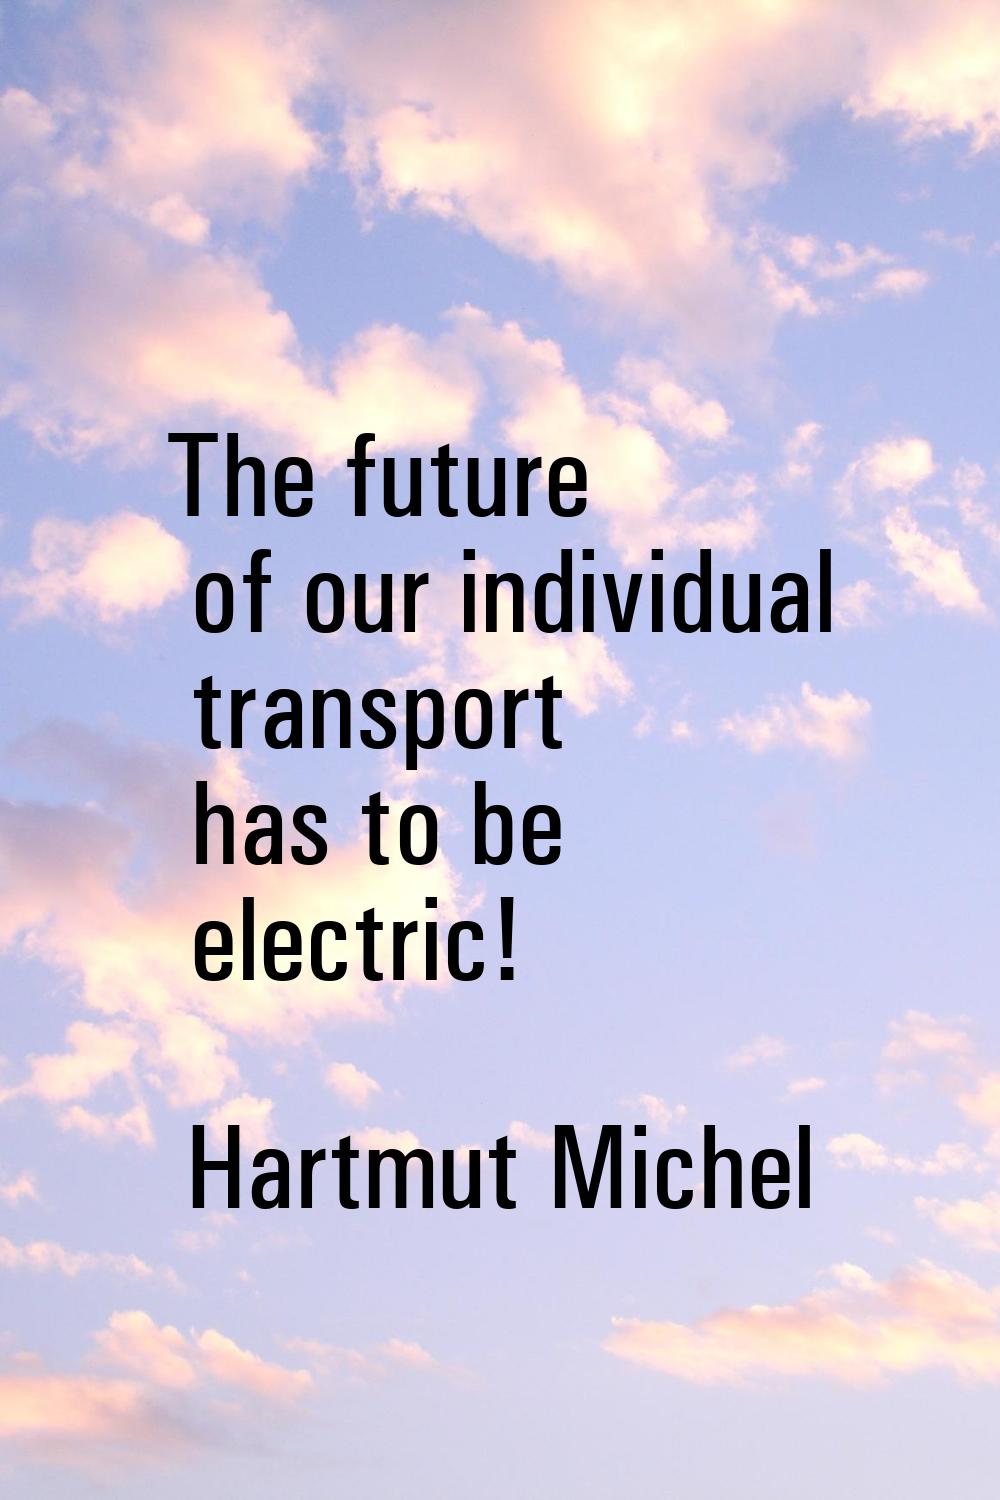 The future of our individual transport has to be electric!